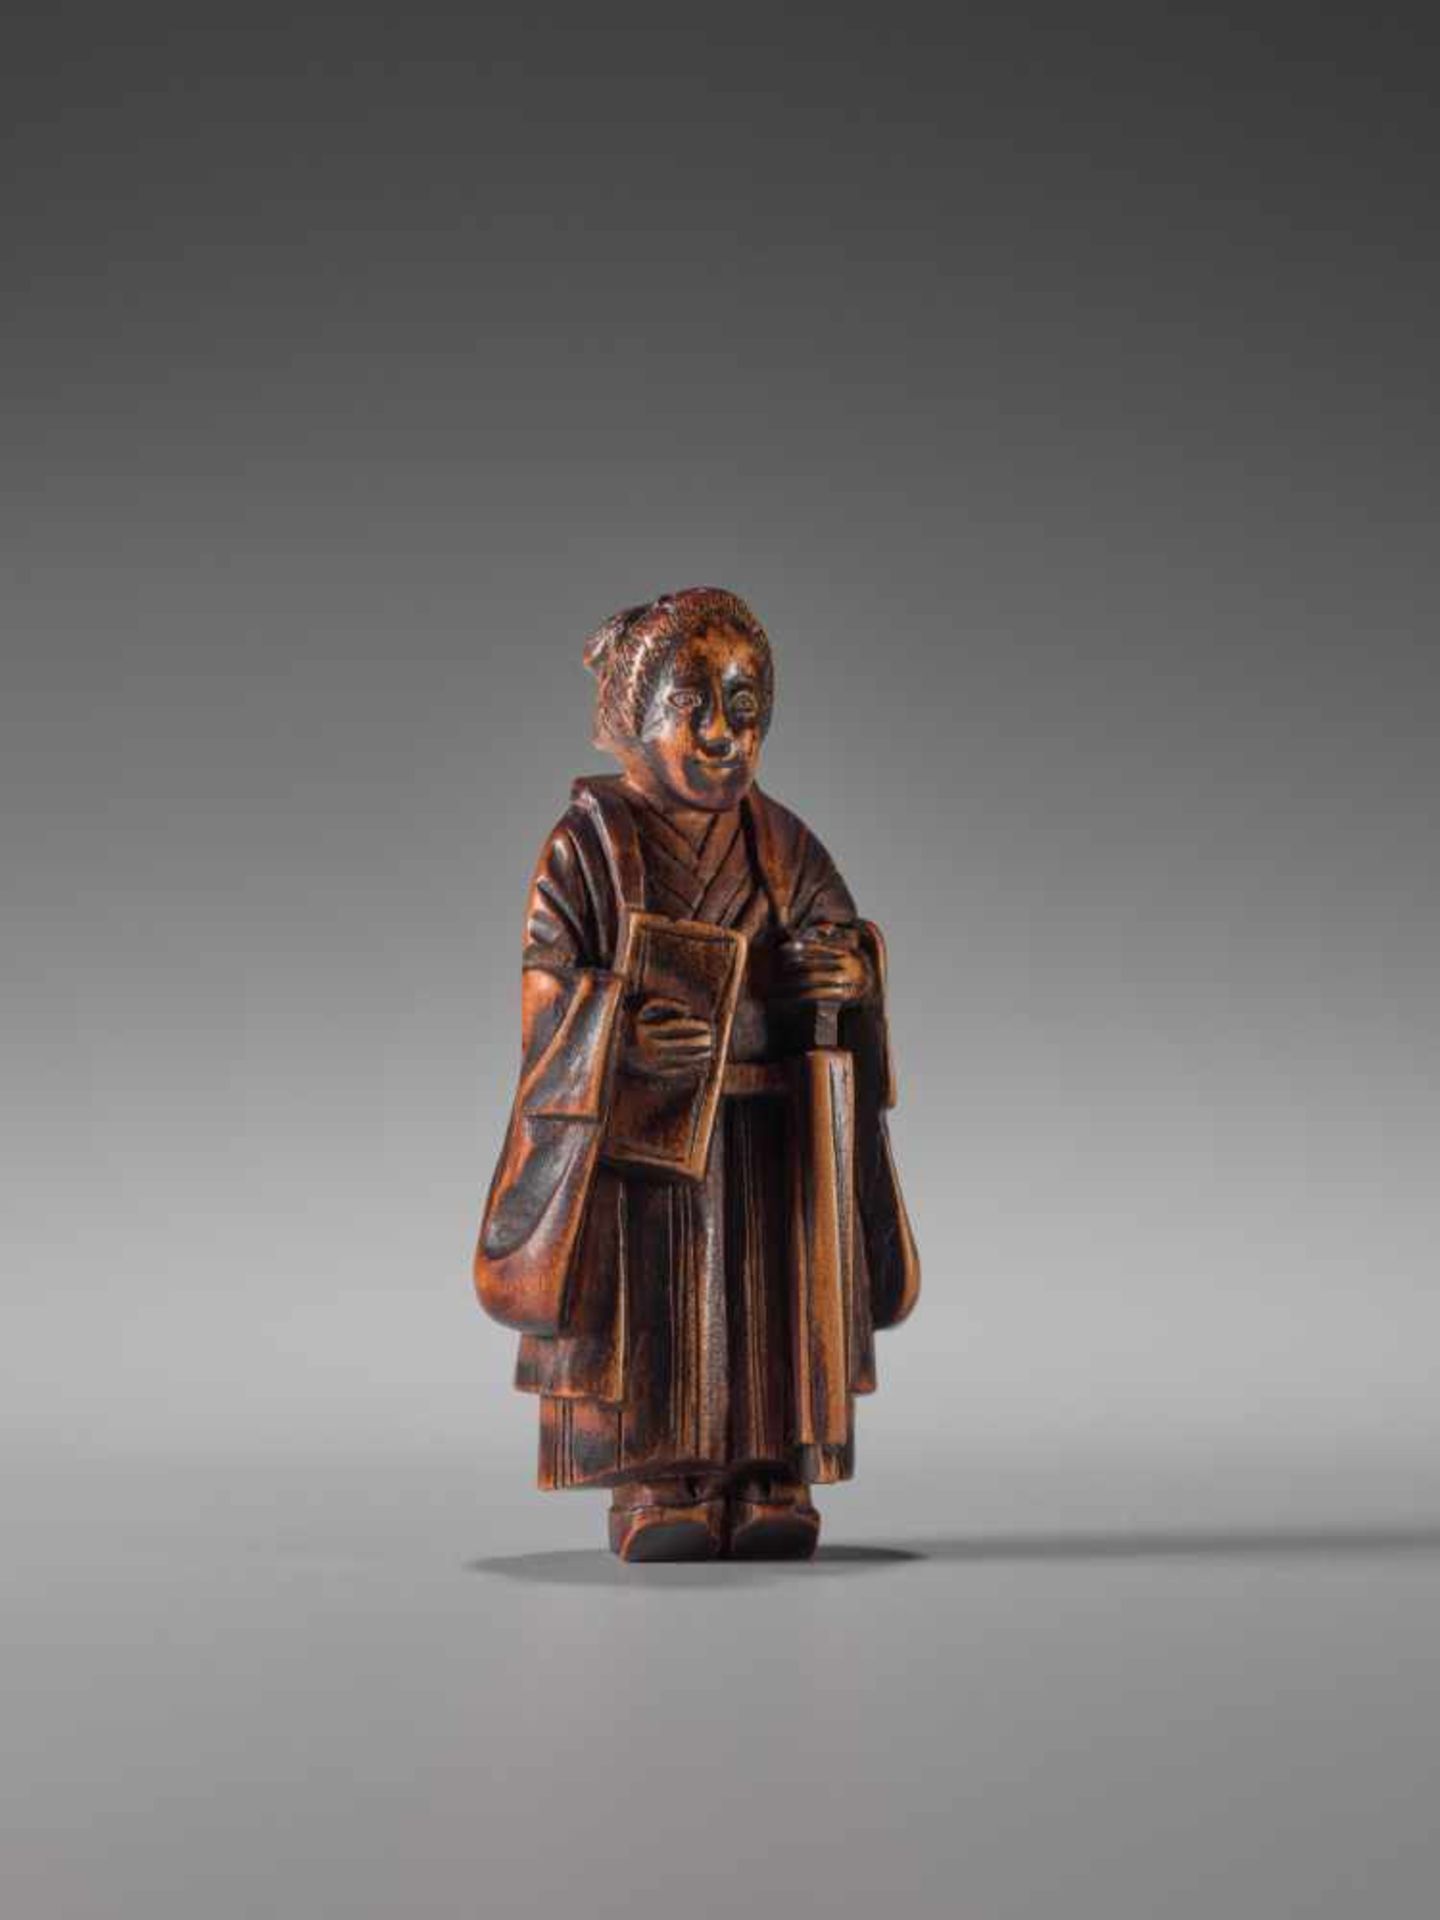 A WOOD NETSUKE OF A LADY WITH BOOK AND UMBRELLAWood netsukeJapan1st half of 19th century, Edo period - Image 2 of 6